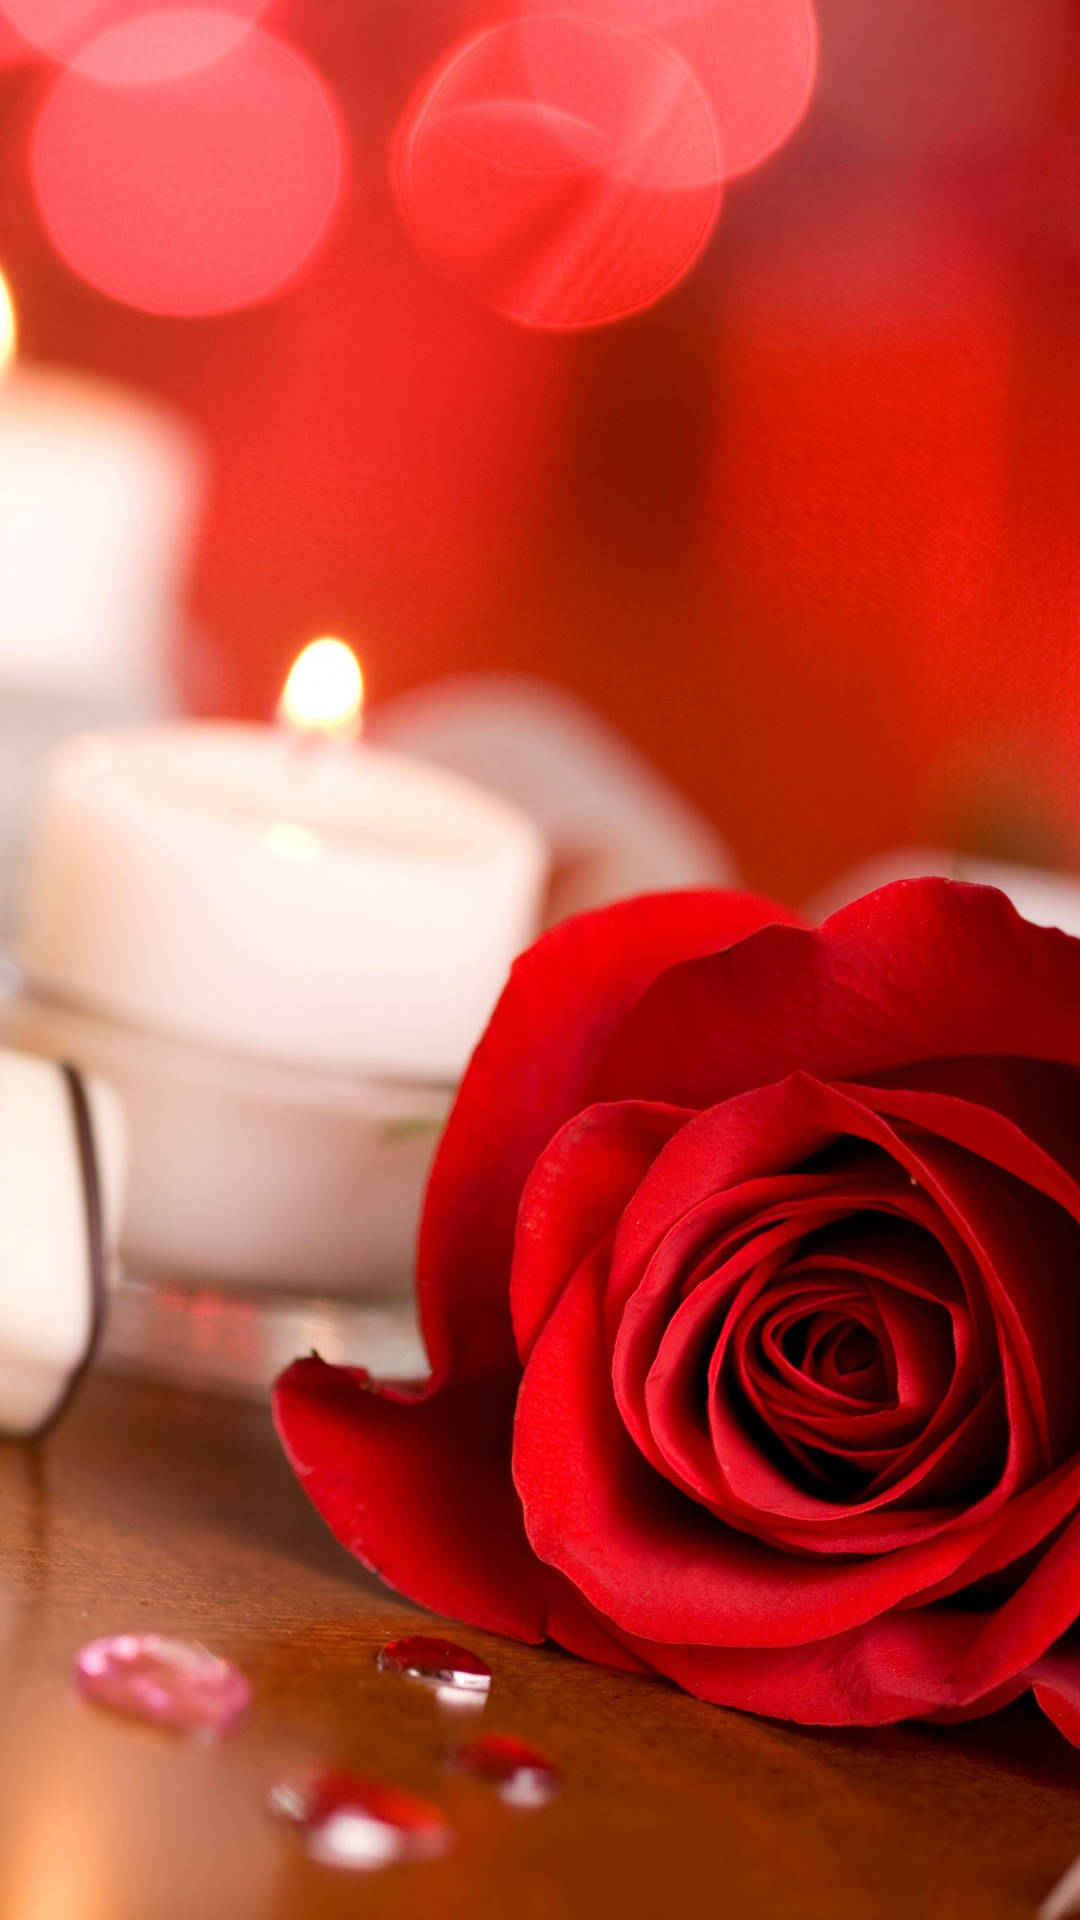 Romantic Rose And Candle Wallpaper